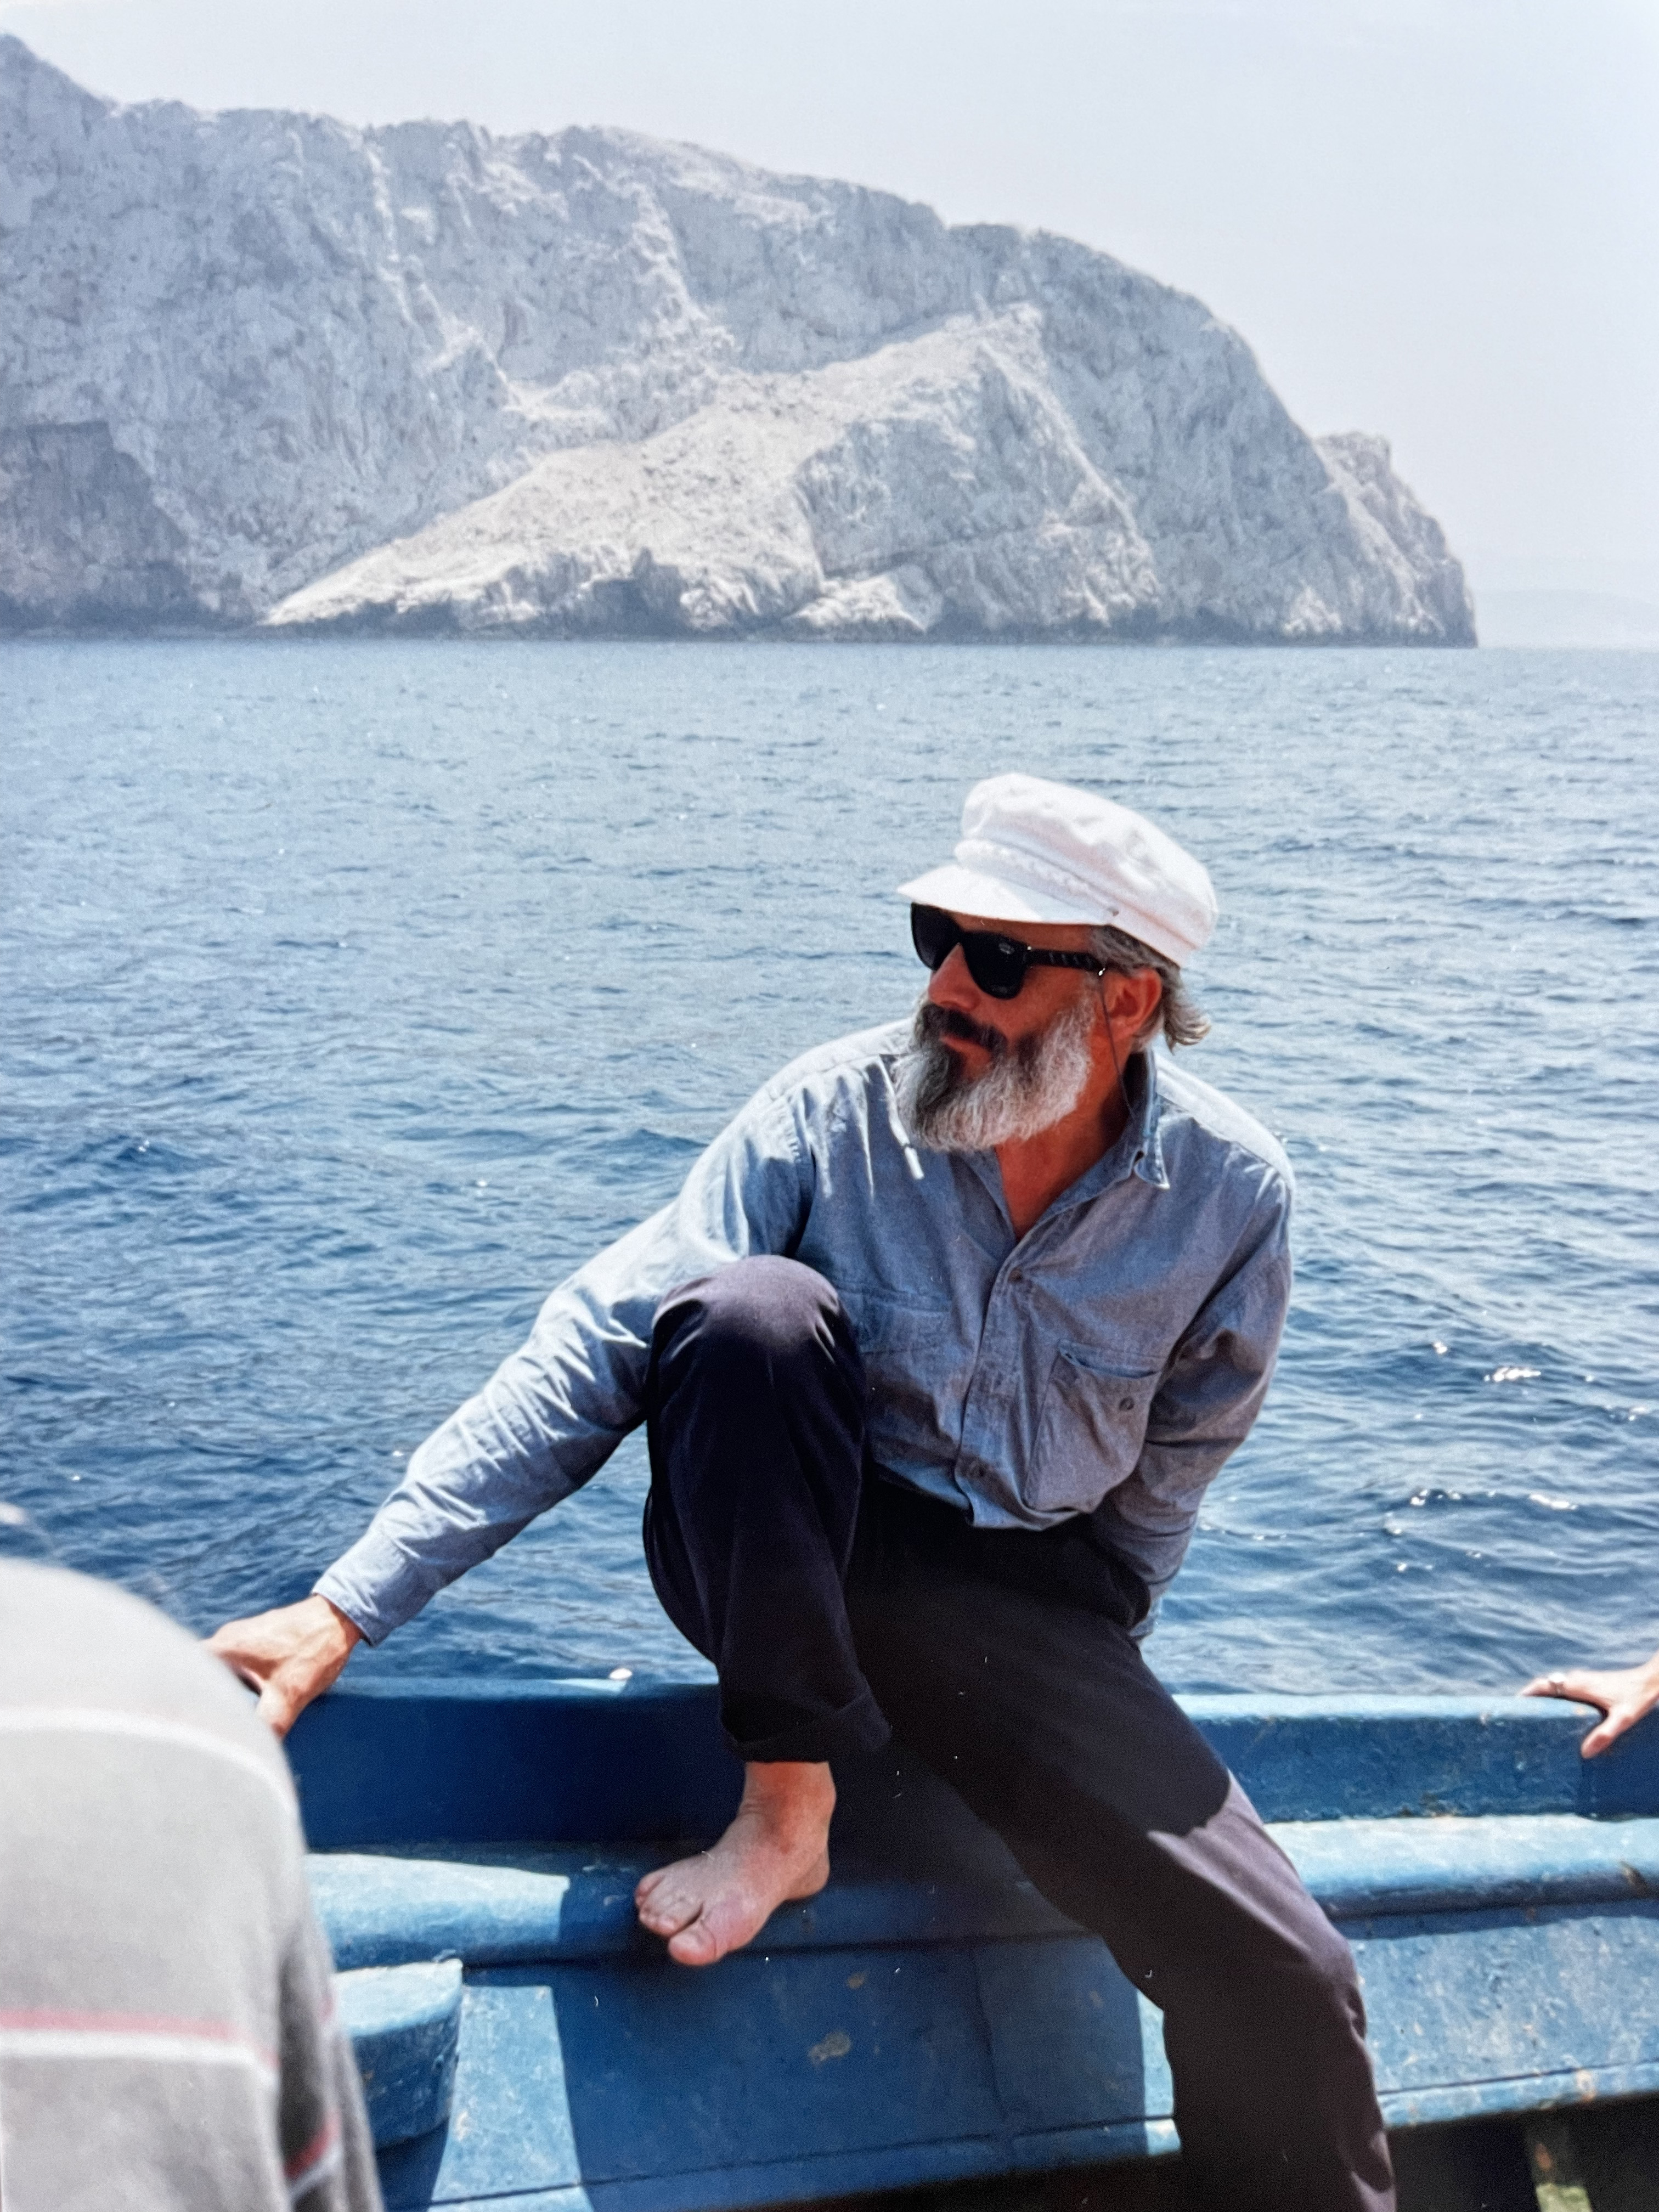 An image of Henry matthews riding a fishing boat, caique, on Amorgos